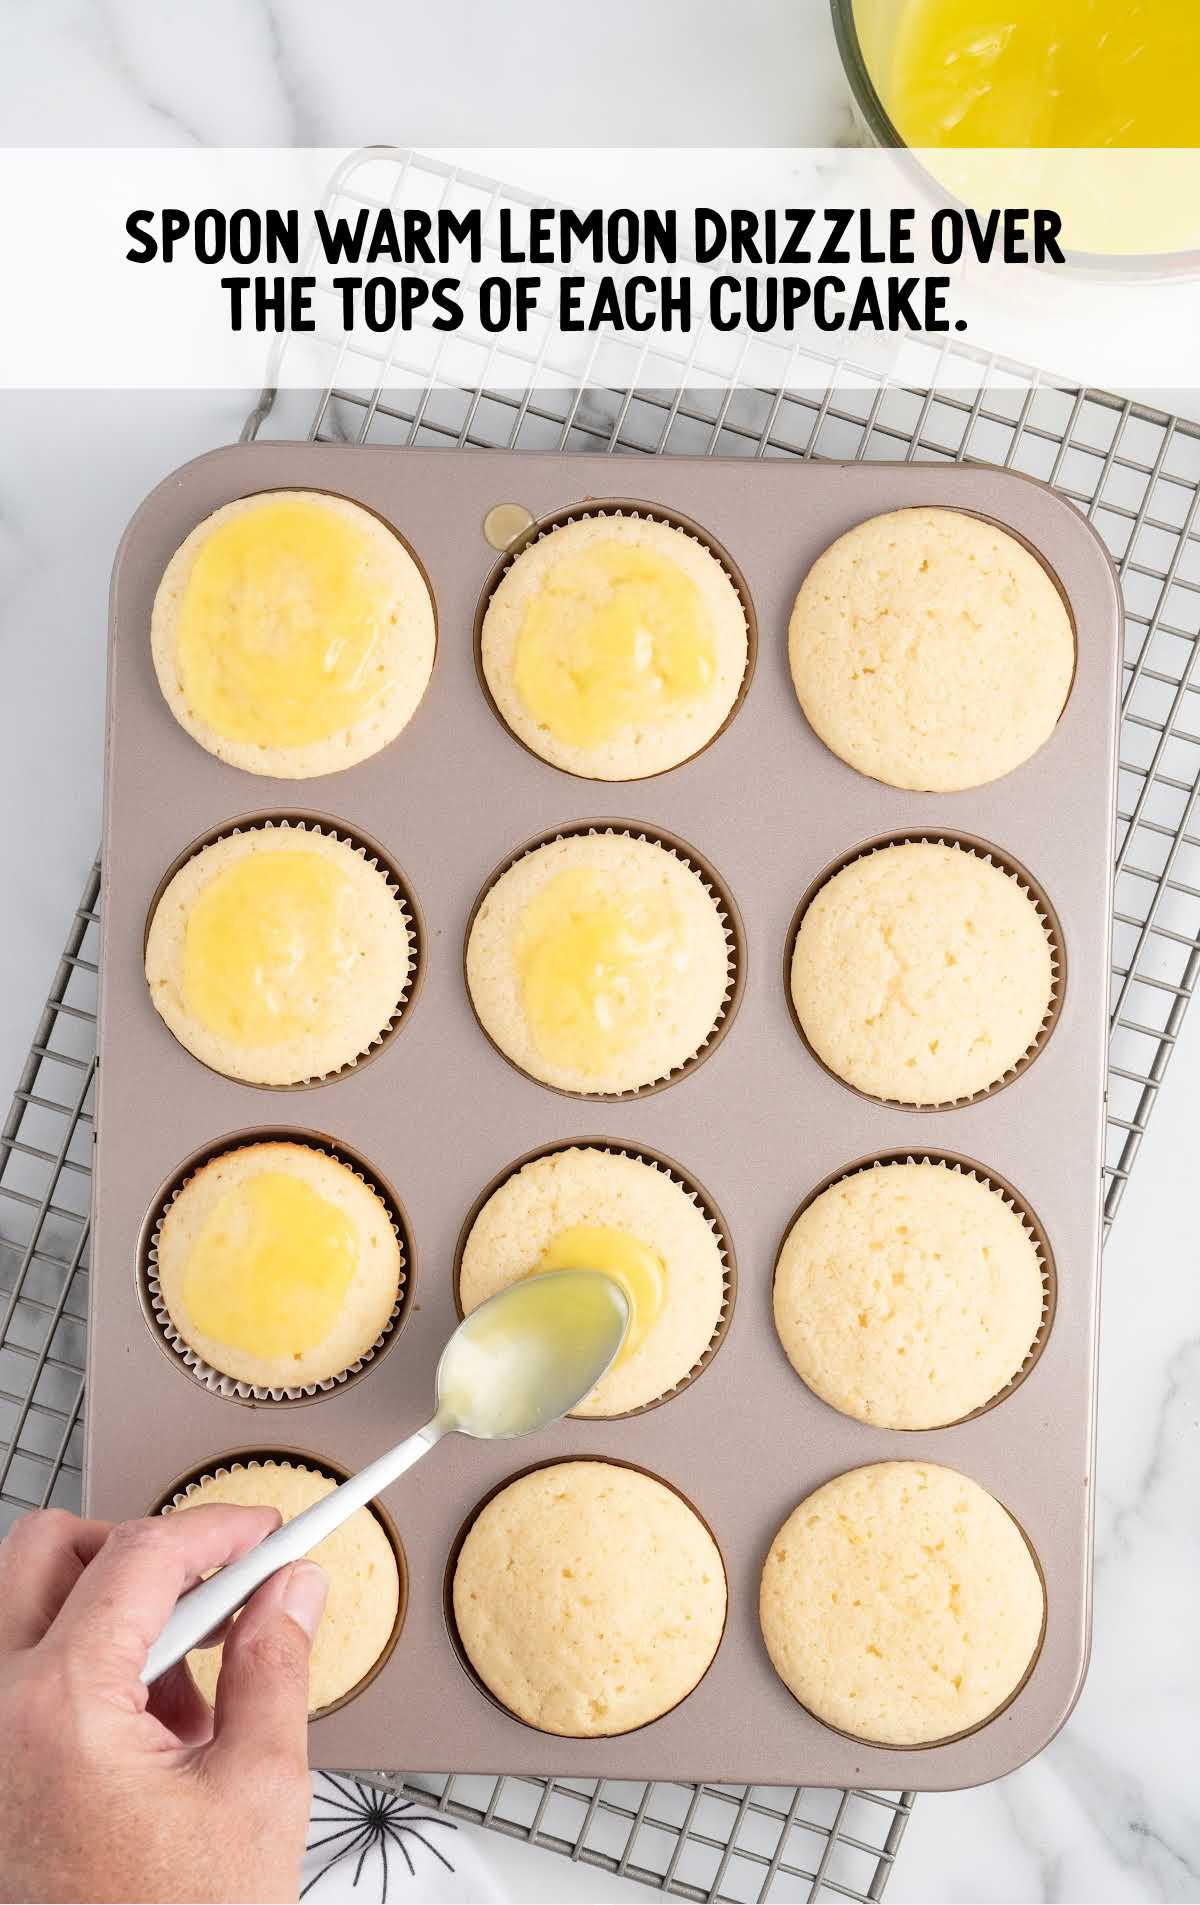 lemon drizzle spooned over the top of the cupcakes